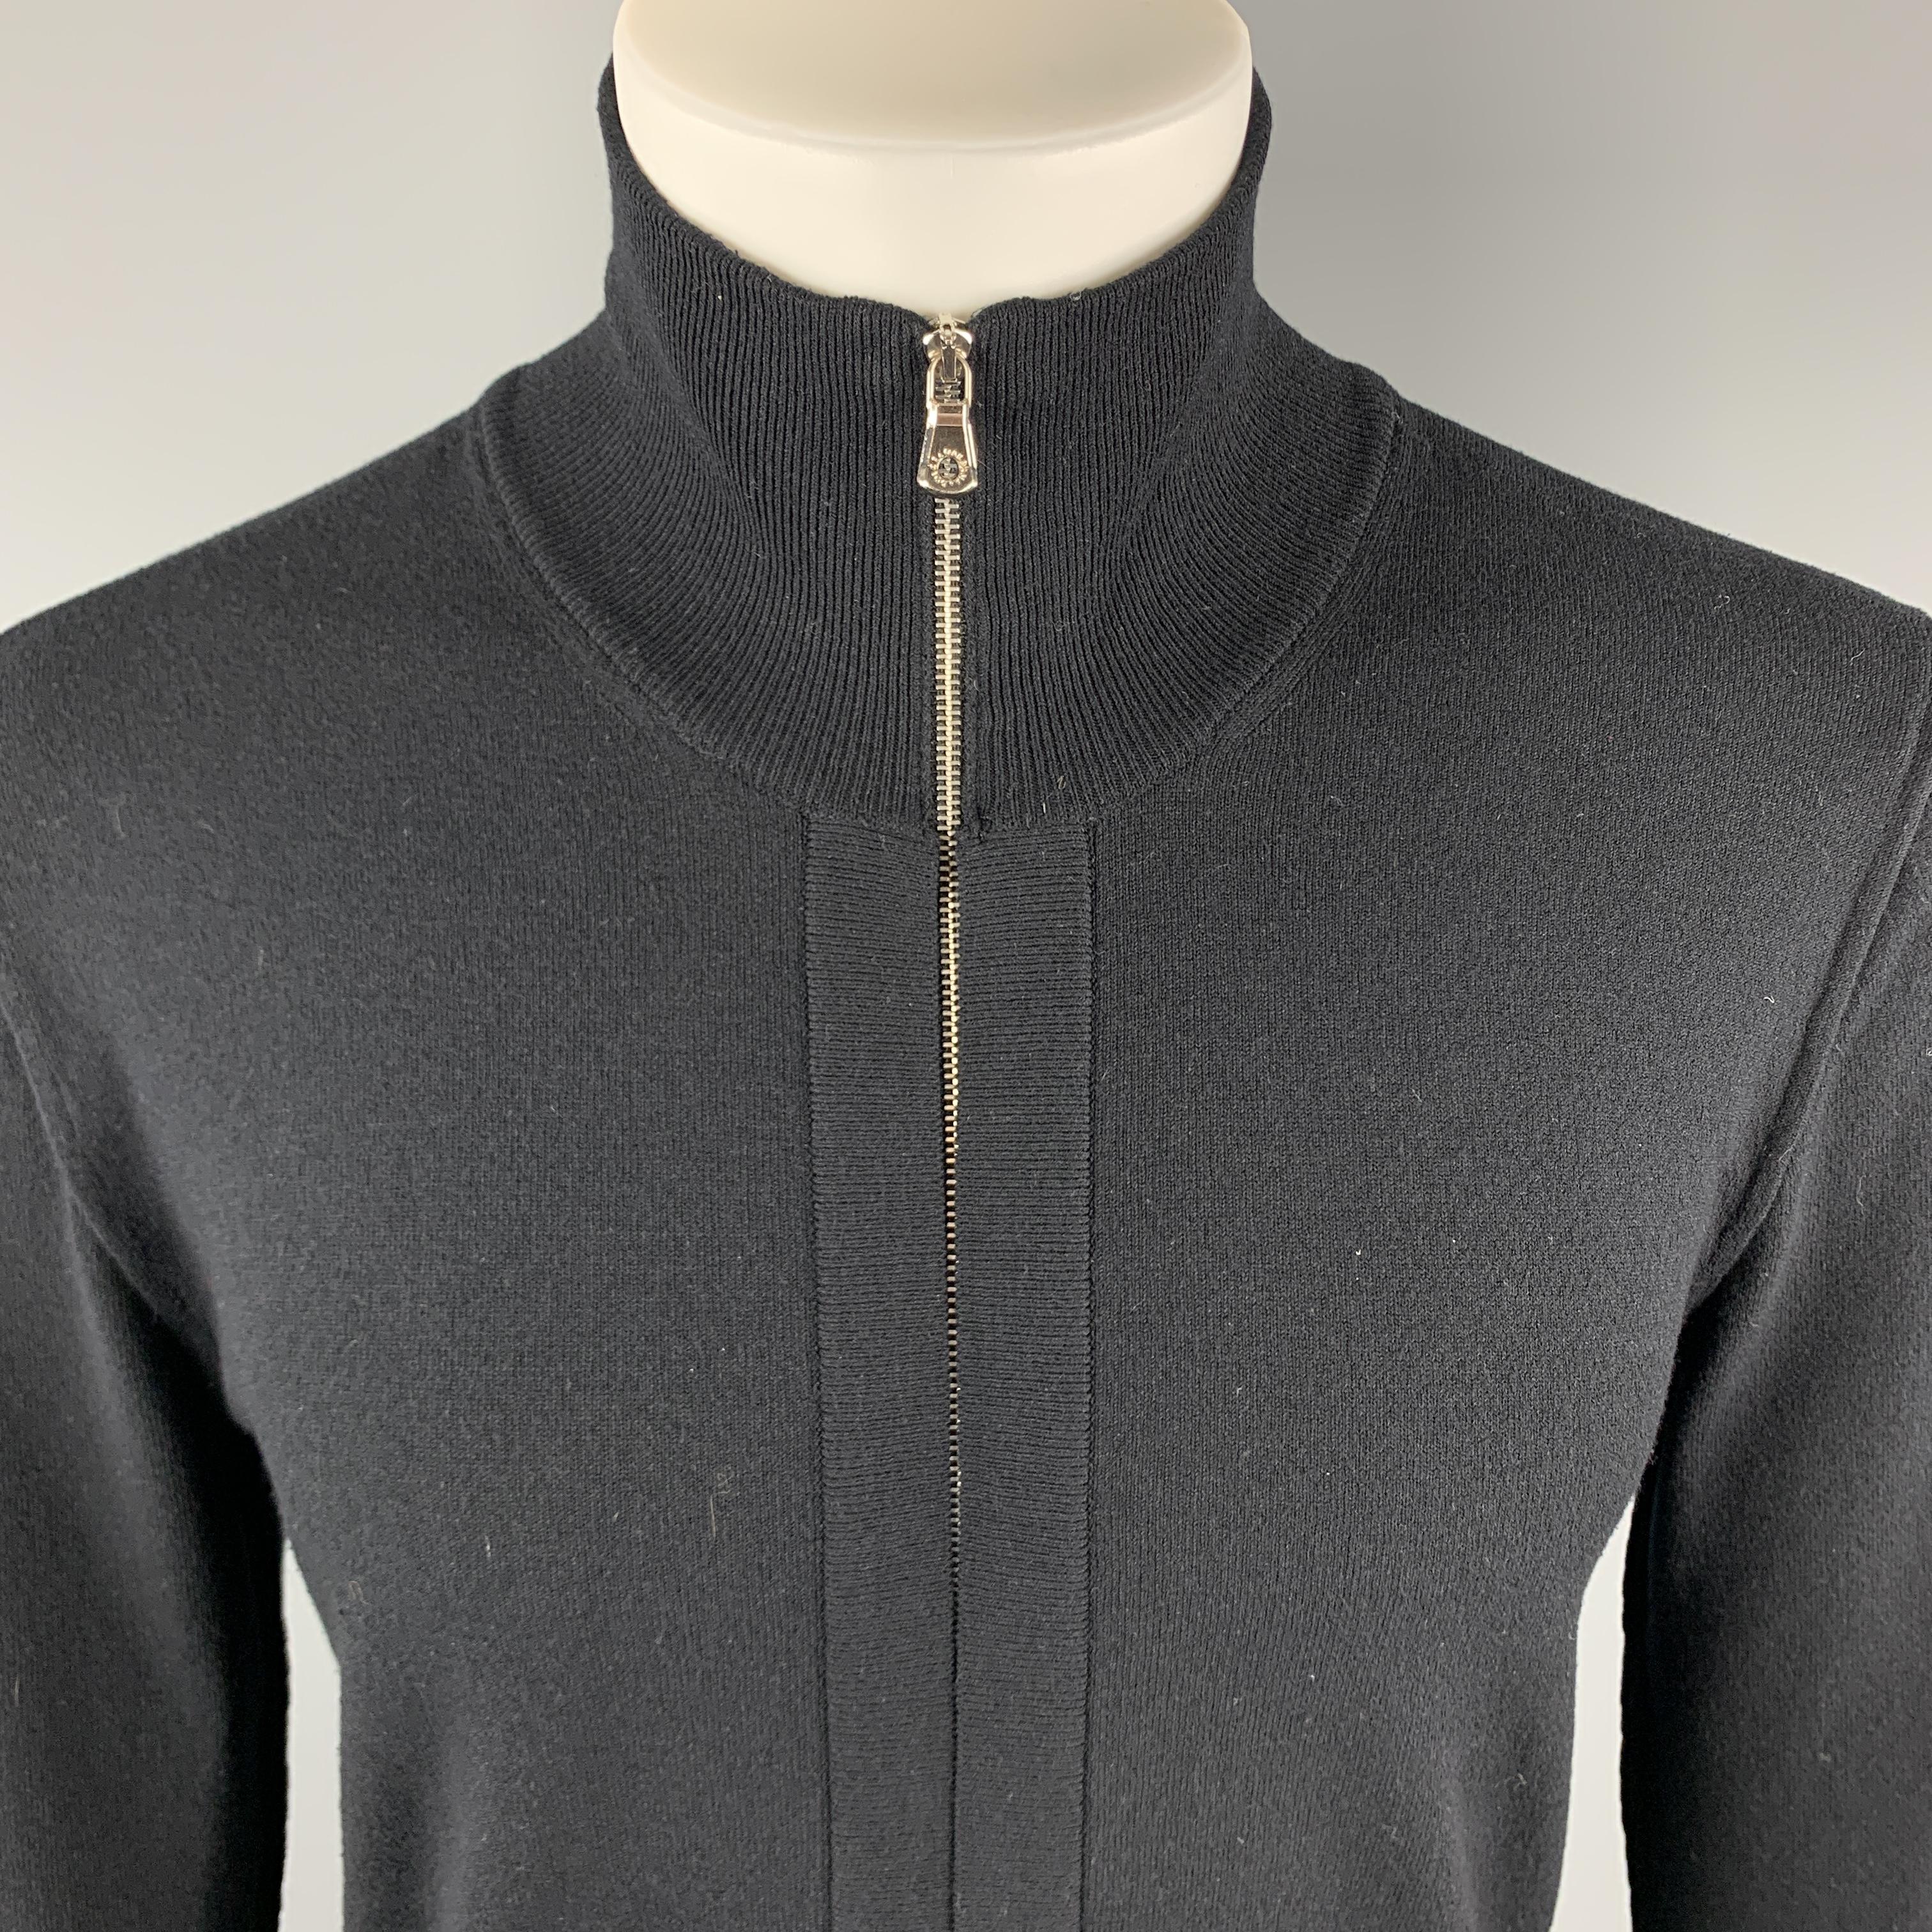 DOLCE & GABBANA Cardigan Sweater comes in a solid black rayon blend material, featuring a high collar, hidden closure at front, zip up, and ribbed cuffs and hem. Made in Italy. 

Excellent Pre-Owned Condition.
Marked: IT 48

Measurements:

Shoulder: